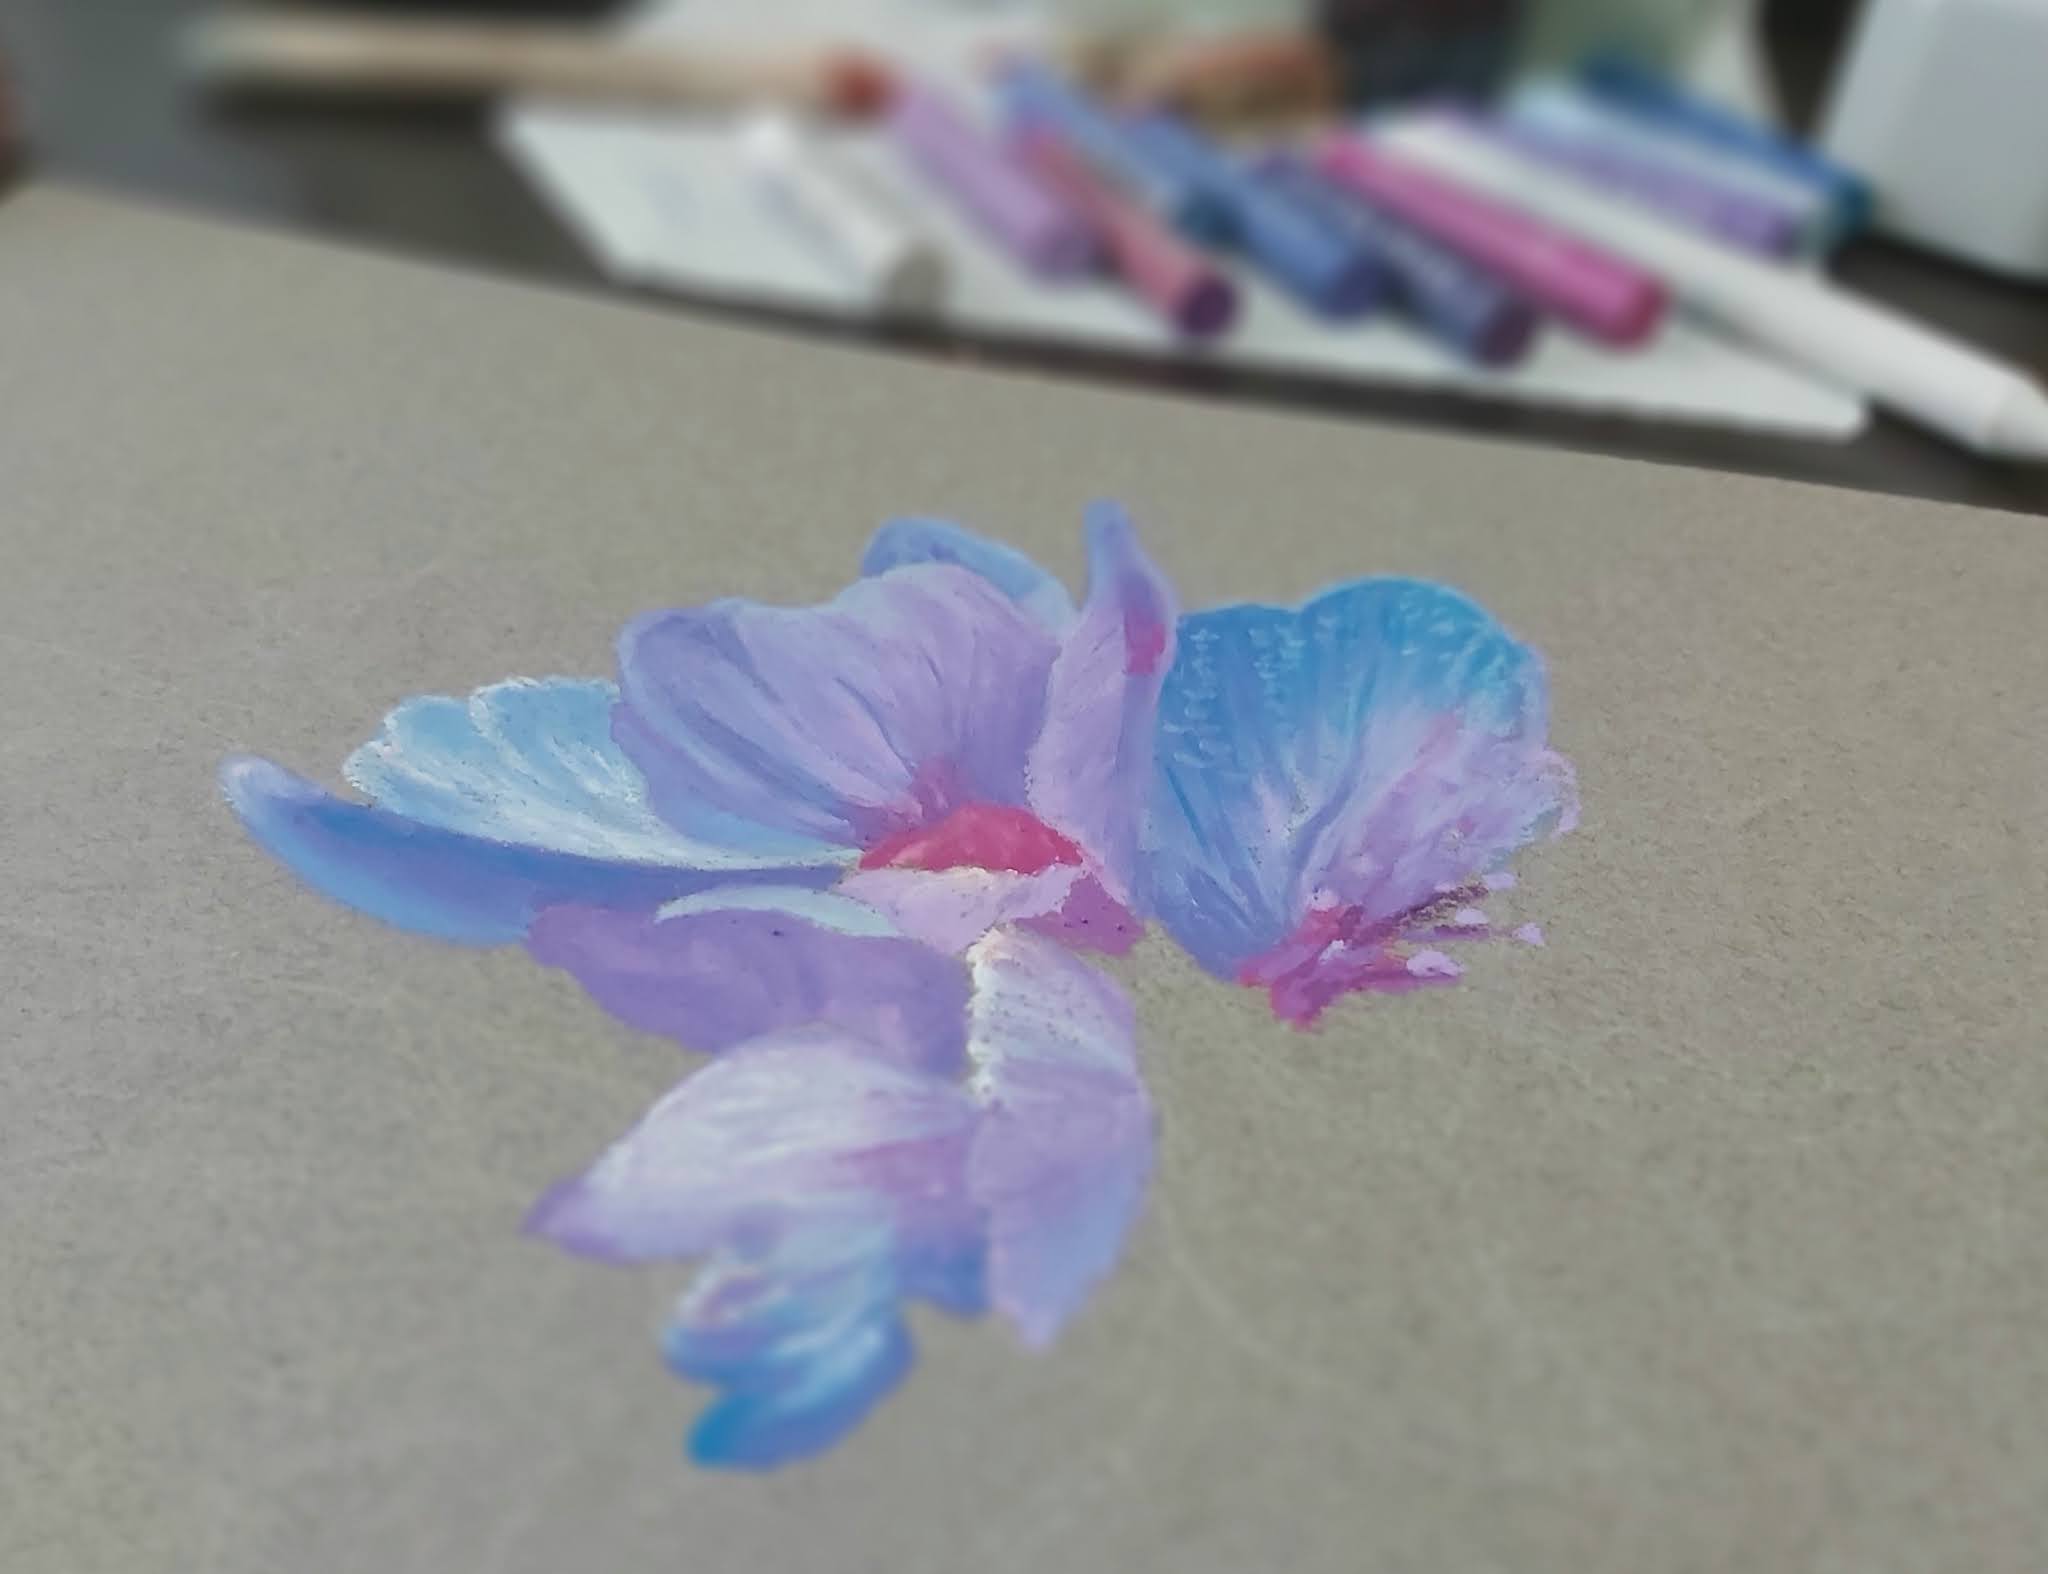 Oil pastels for flowers - blending and layering